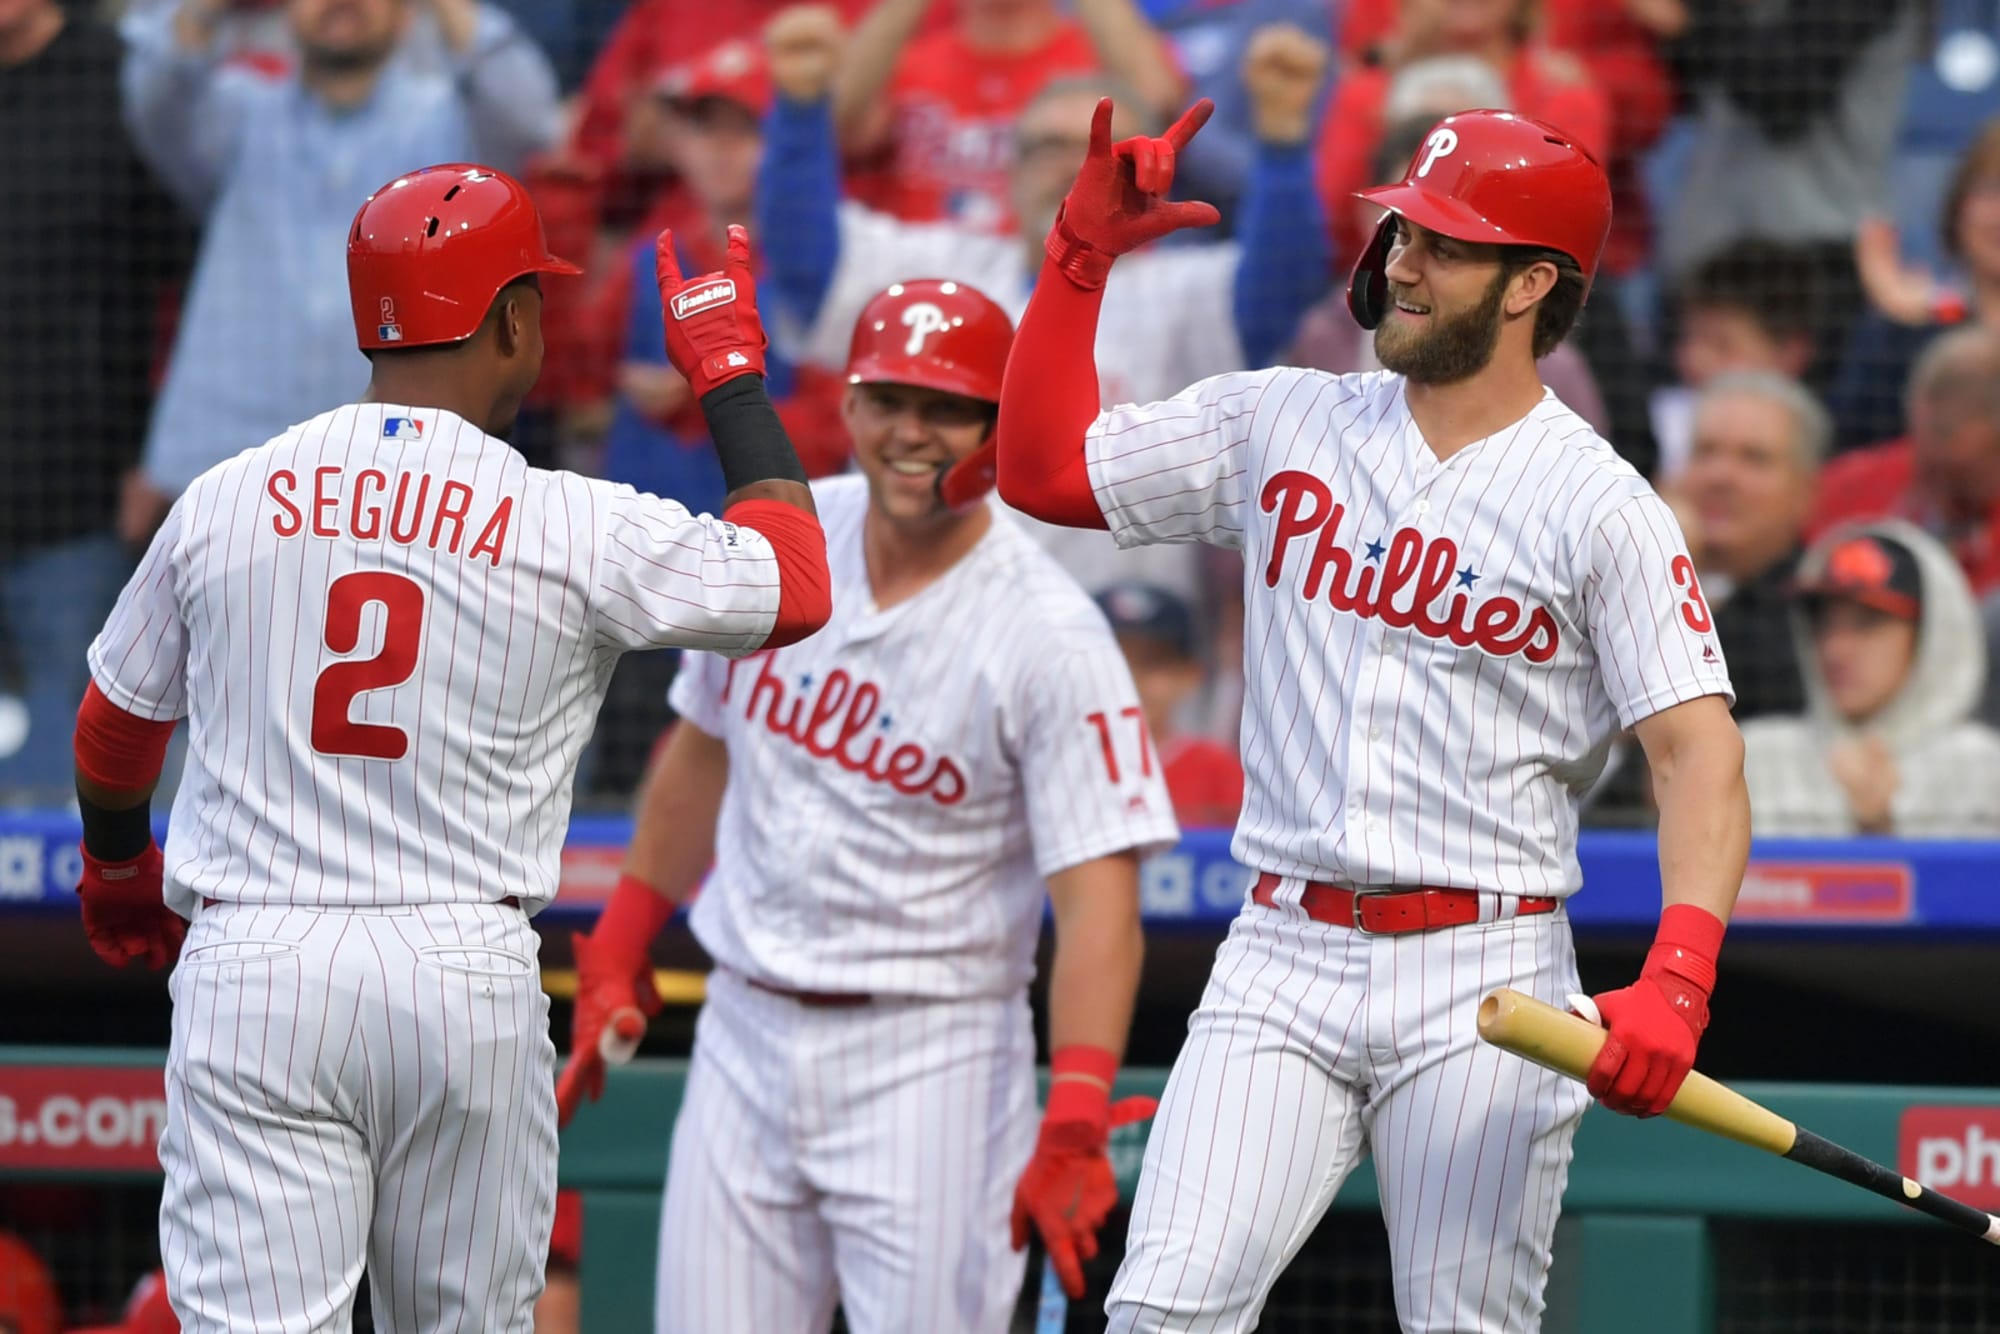 Phillies Checking in on projected 2019 playoff odds